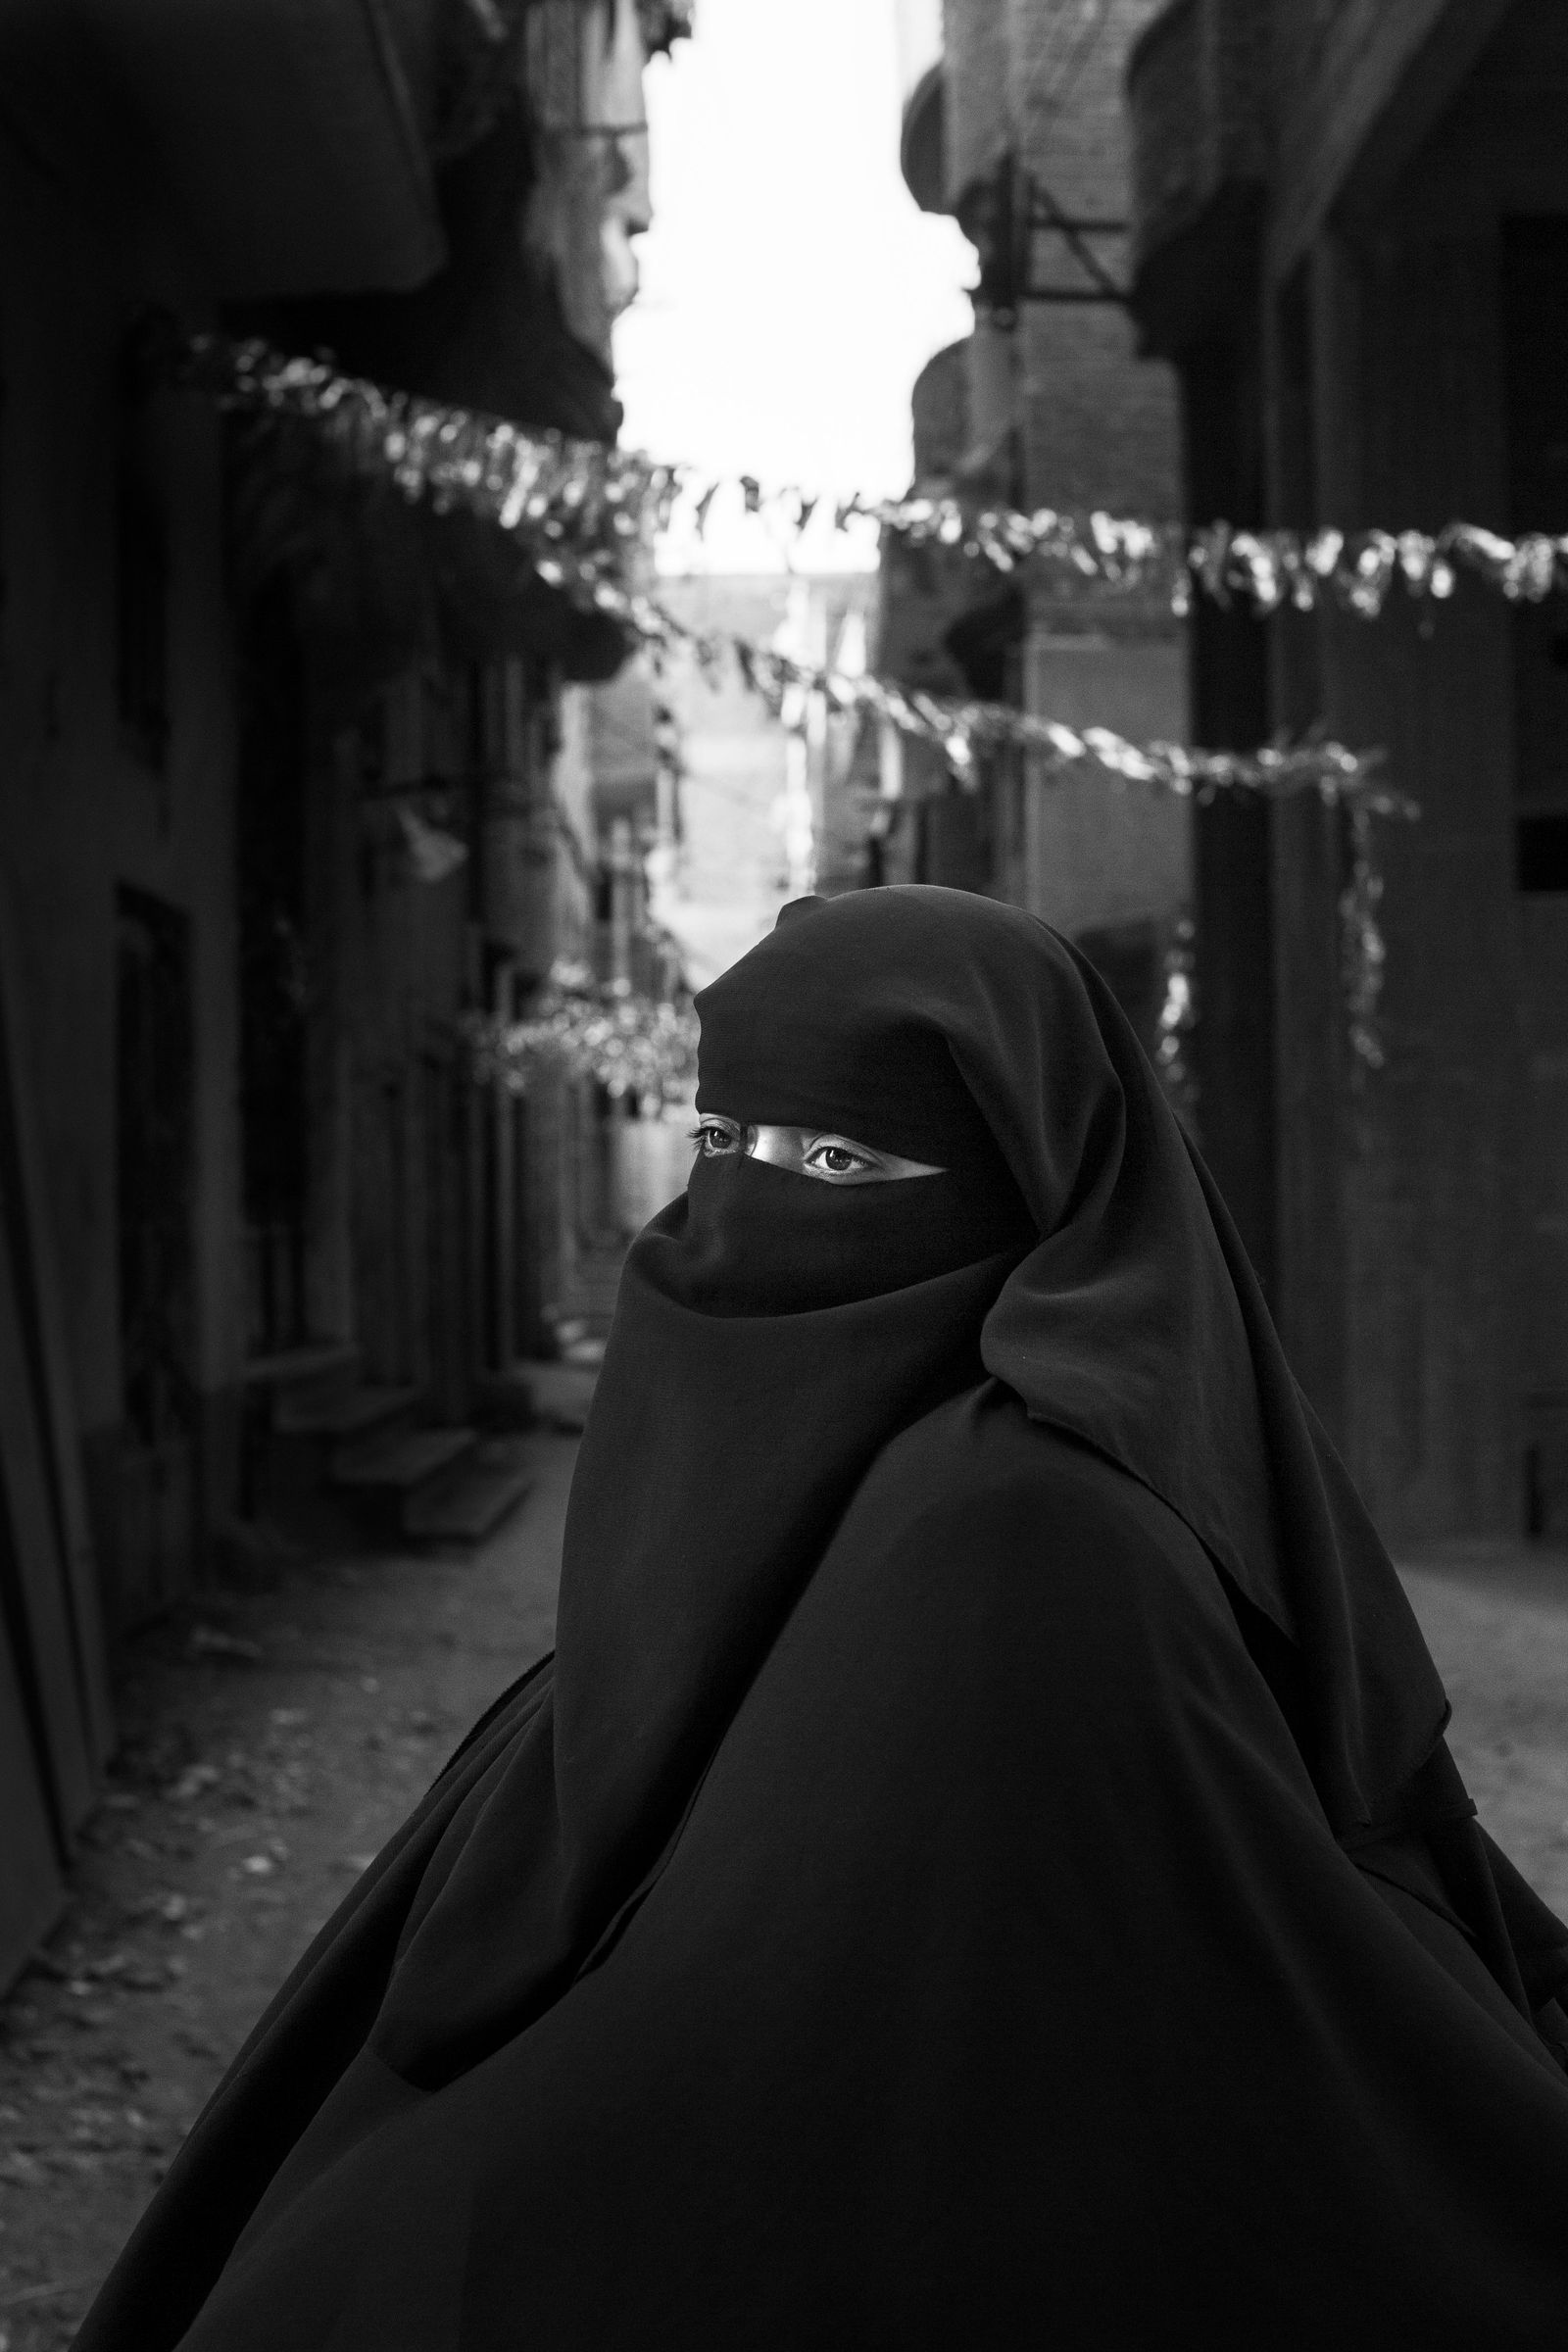 © Lamees Saleh Sharaf Eldin - Manal, Ruqayya's mother, stands in the street where Ruqaiya used to play with her friends.